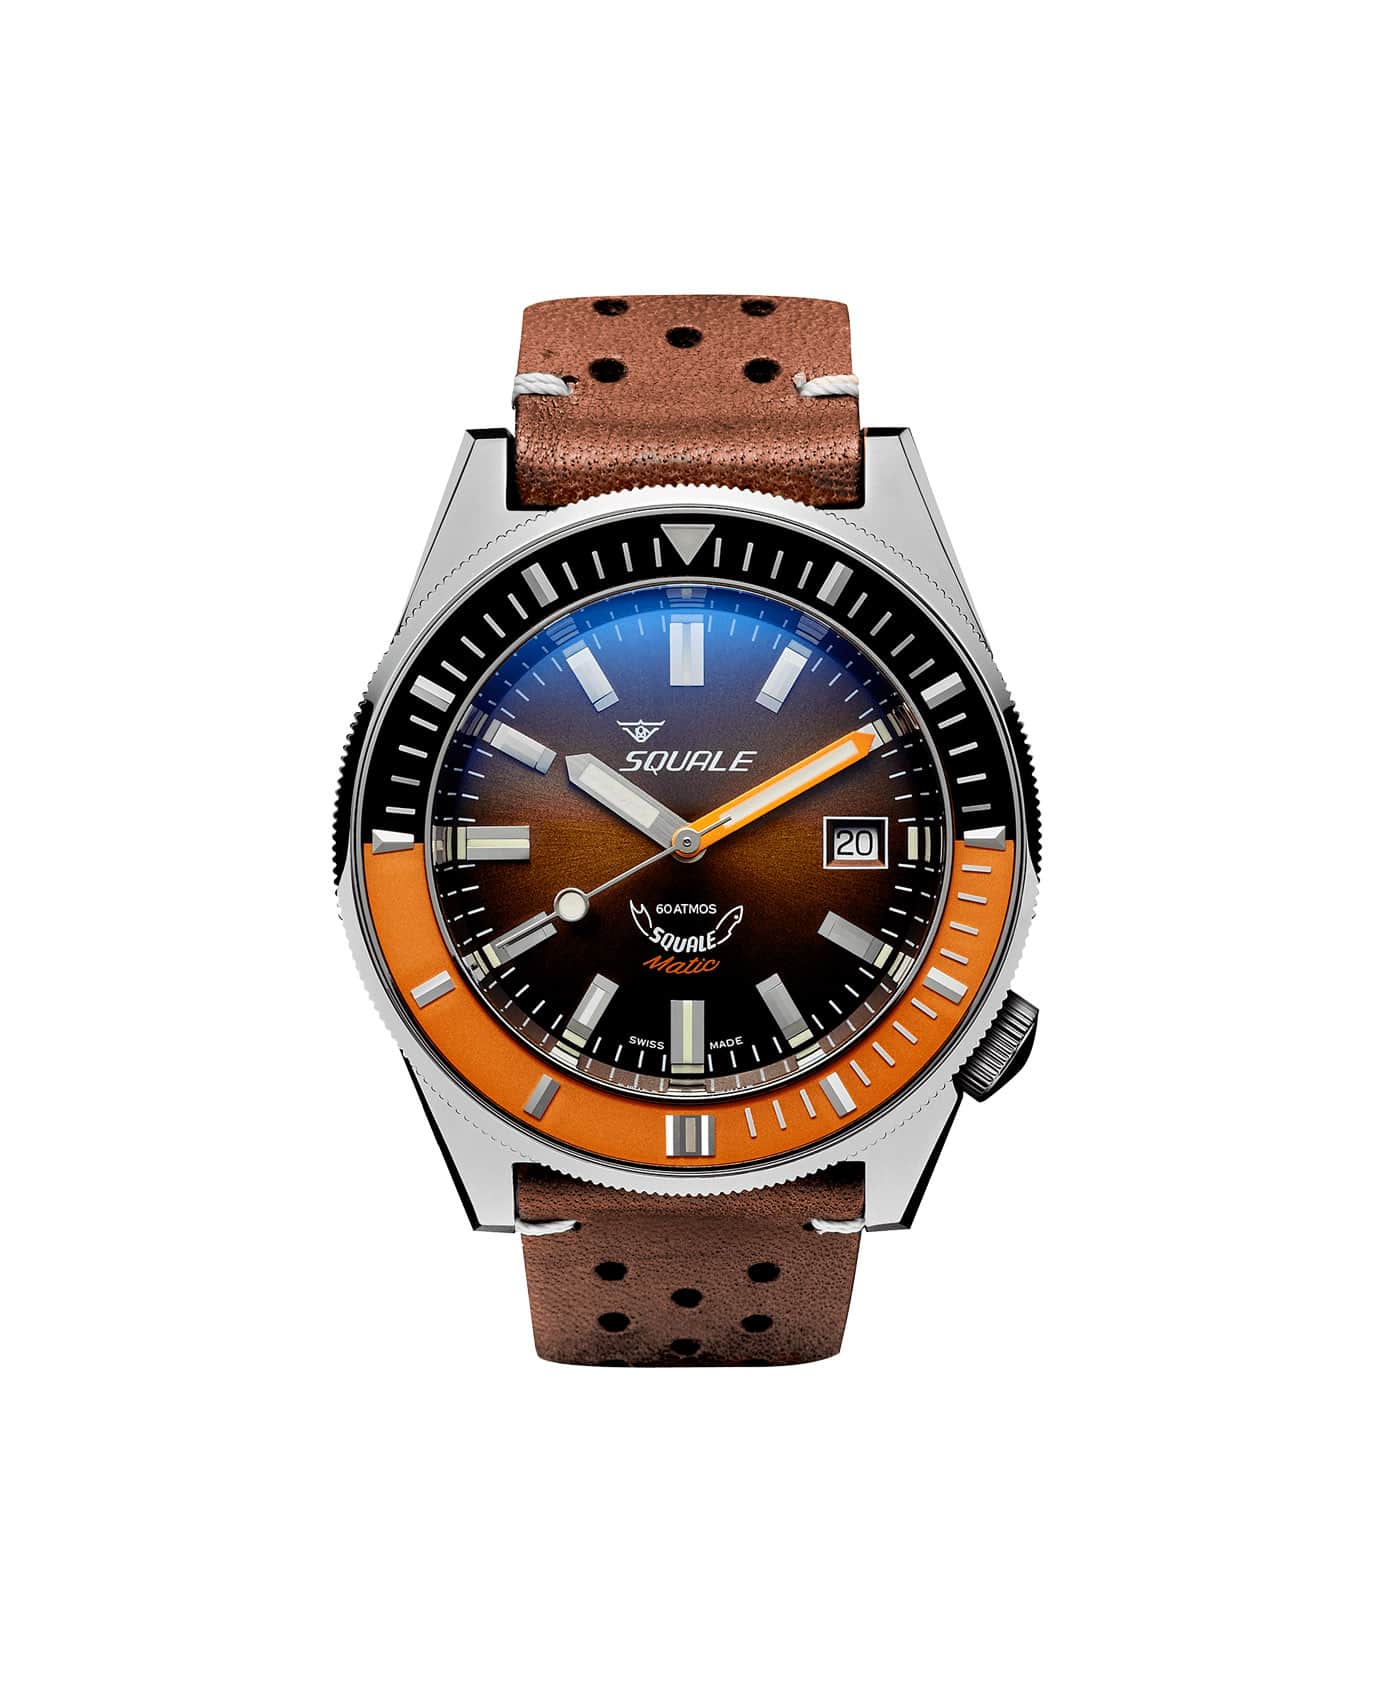 Squale - Matic - Chocolate leather strap - front